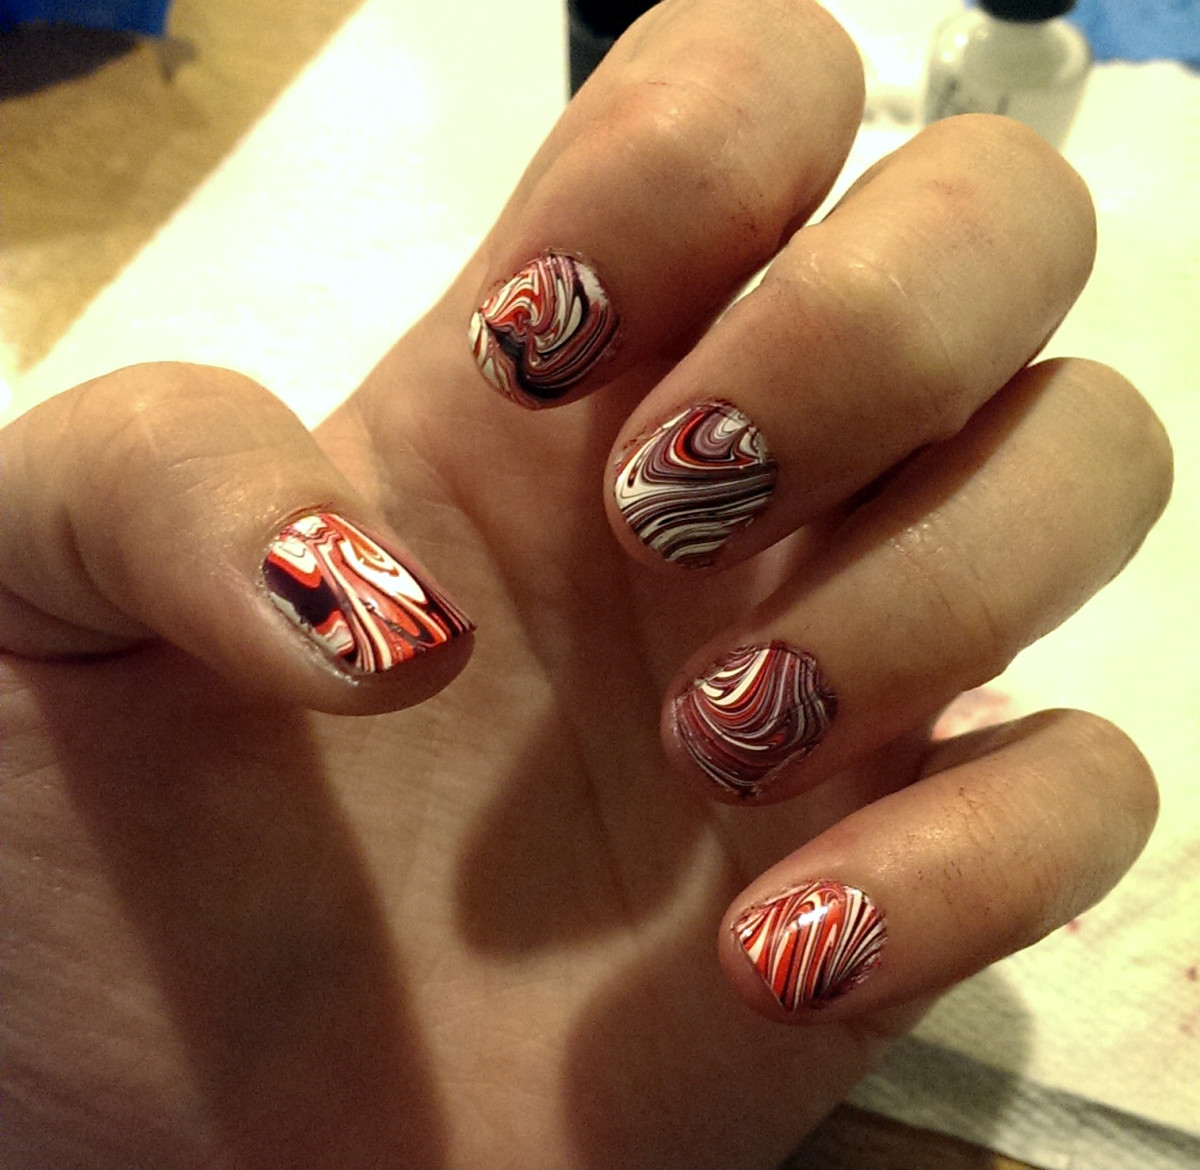 Here's what my nails looked like after I completed the marbling on each finger!